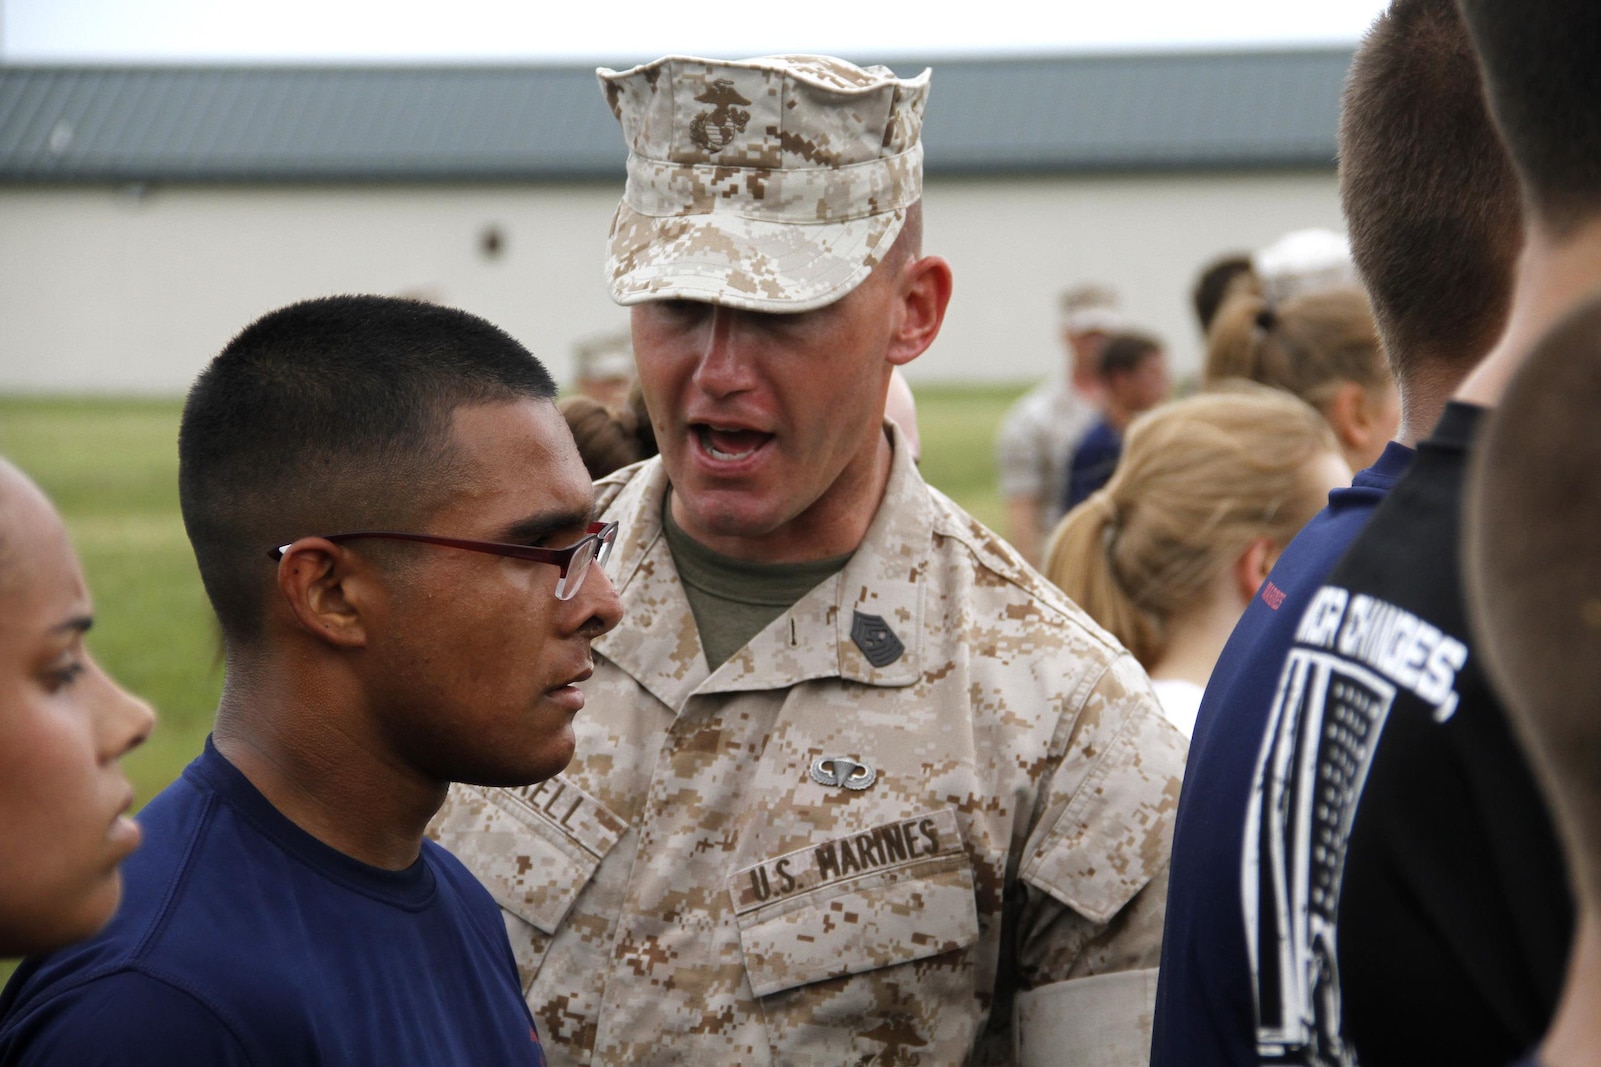 Sergeant Major Christopher A. Farrell, Marine Corps Recruiting Station Kansas City sergeant major, instructs a poolee on the dangers of not properly hydrating and displaying mental fortitude during strenuous exercise at RS Kansas City's all-hands pool function at Camp Clark in Nevada, Mo., June 24, 2016.